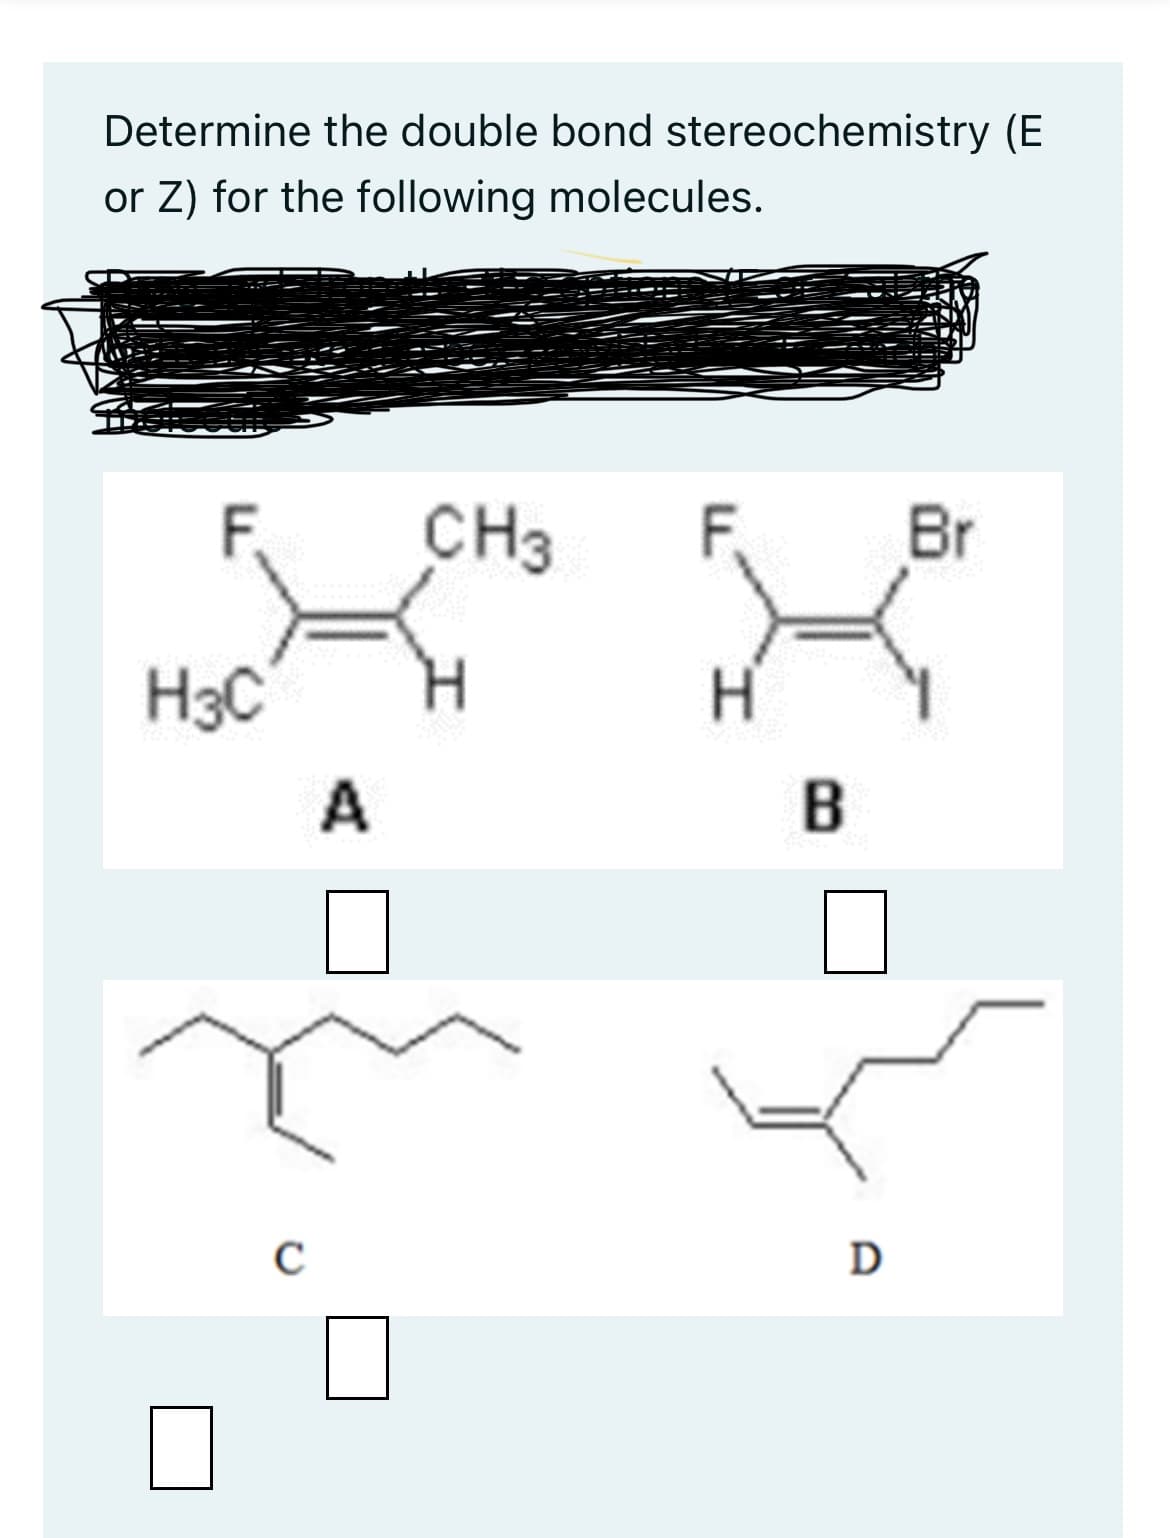 Determine the double bond stereochemistry (E
or Z) for the following molecules.
F.
H3C
C
A
CH3 F.
H
B
D
Br